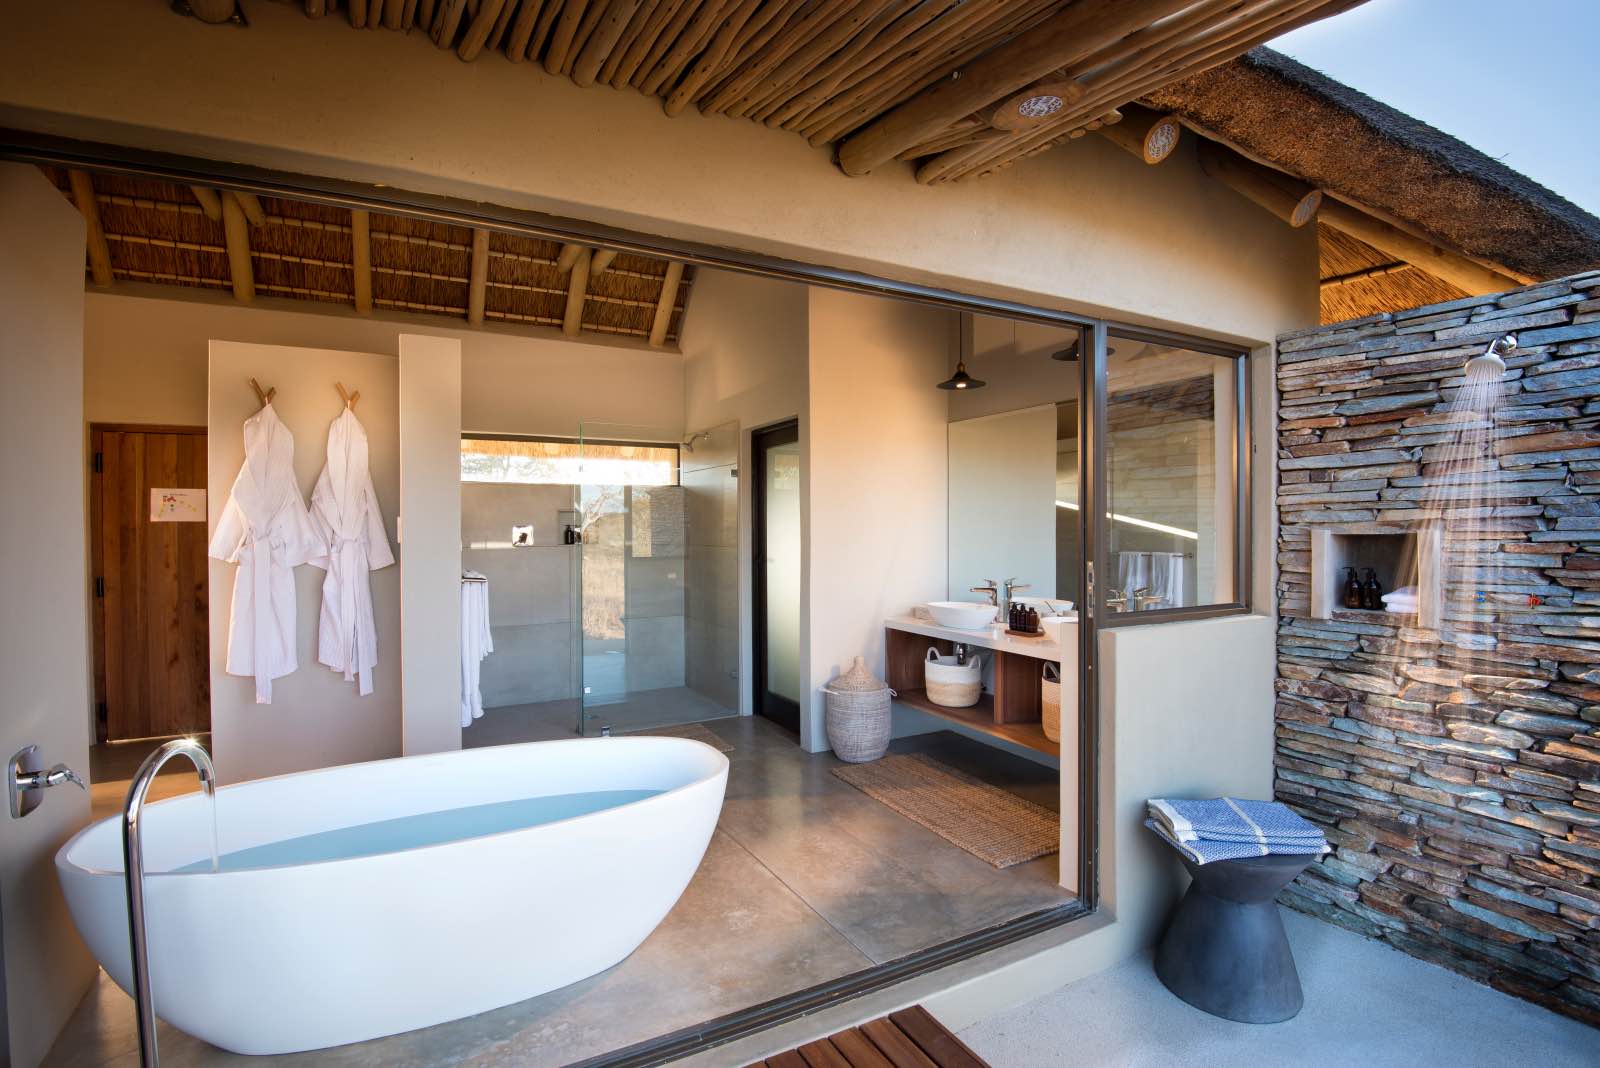 Rockfig en suite bathroom with indoor and outdoor shower and bath tub with a view